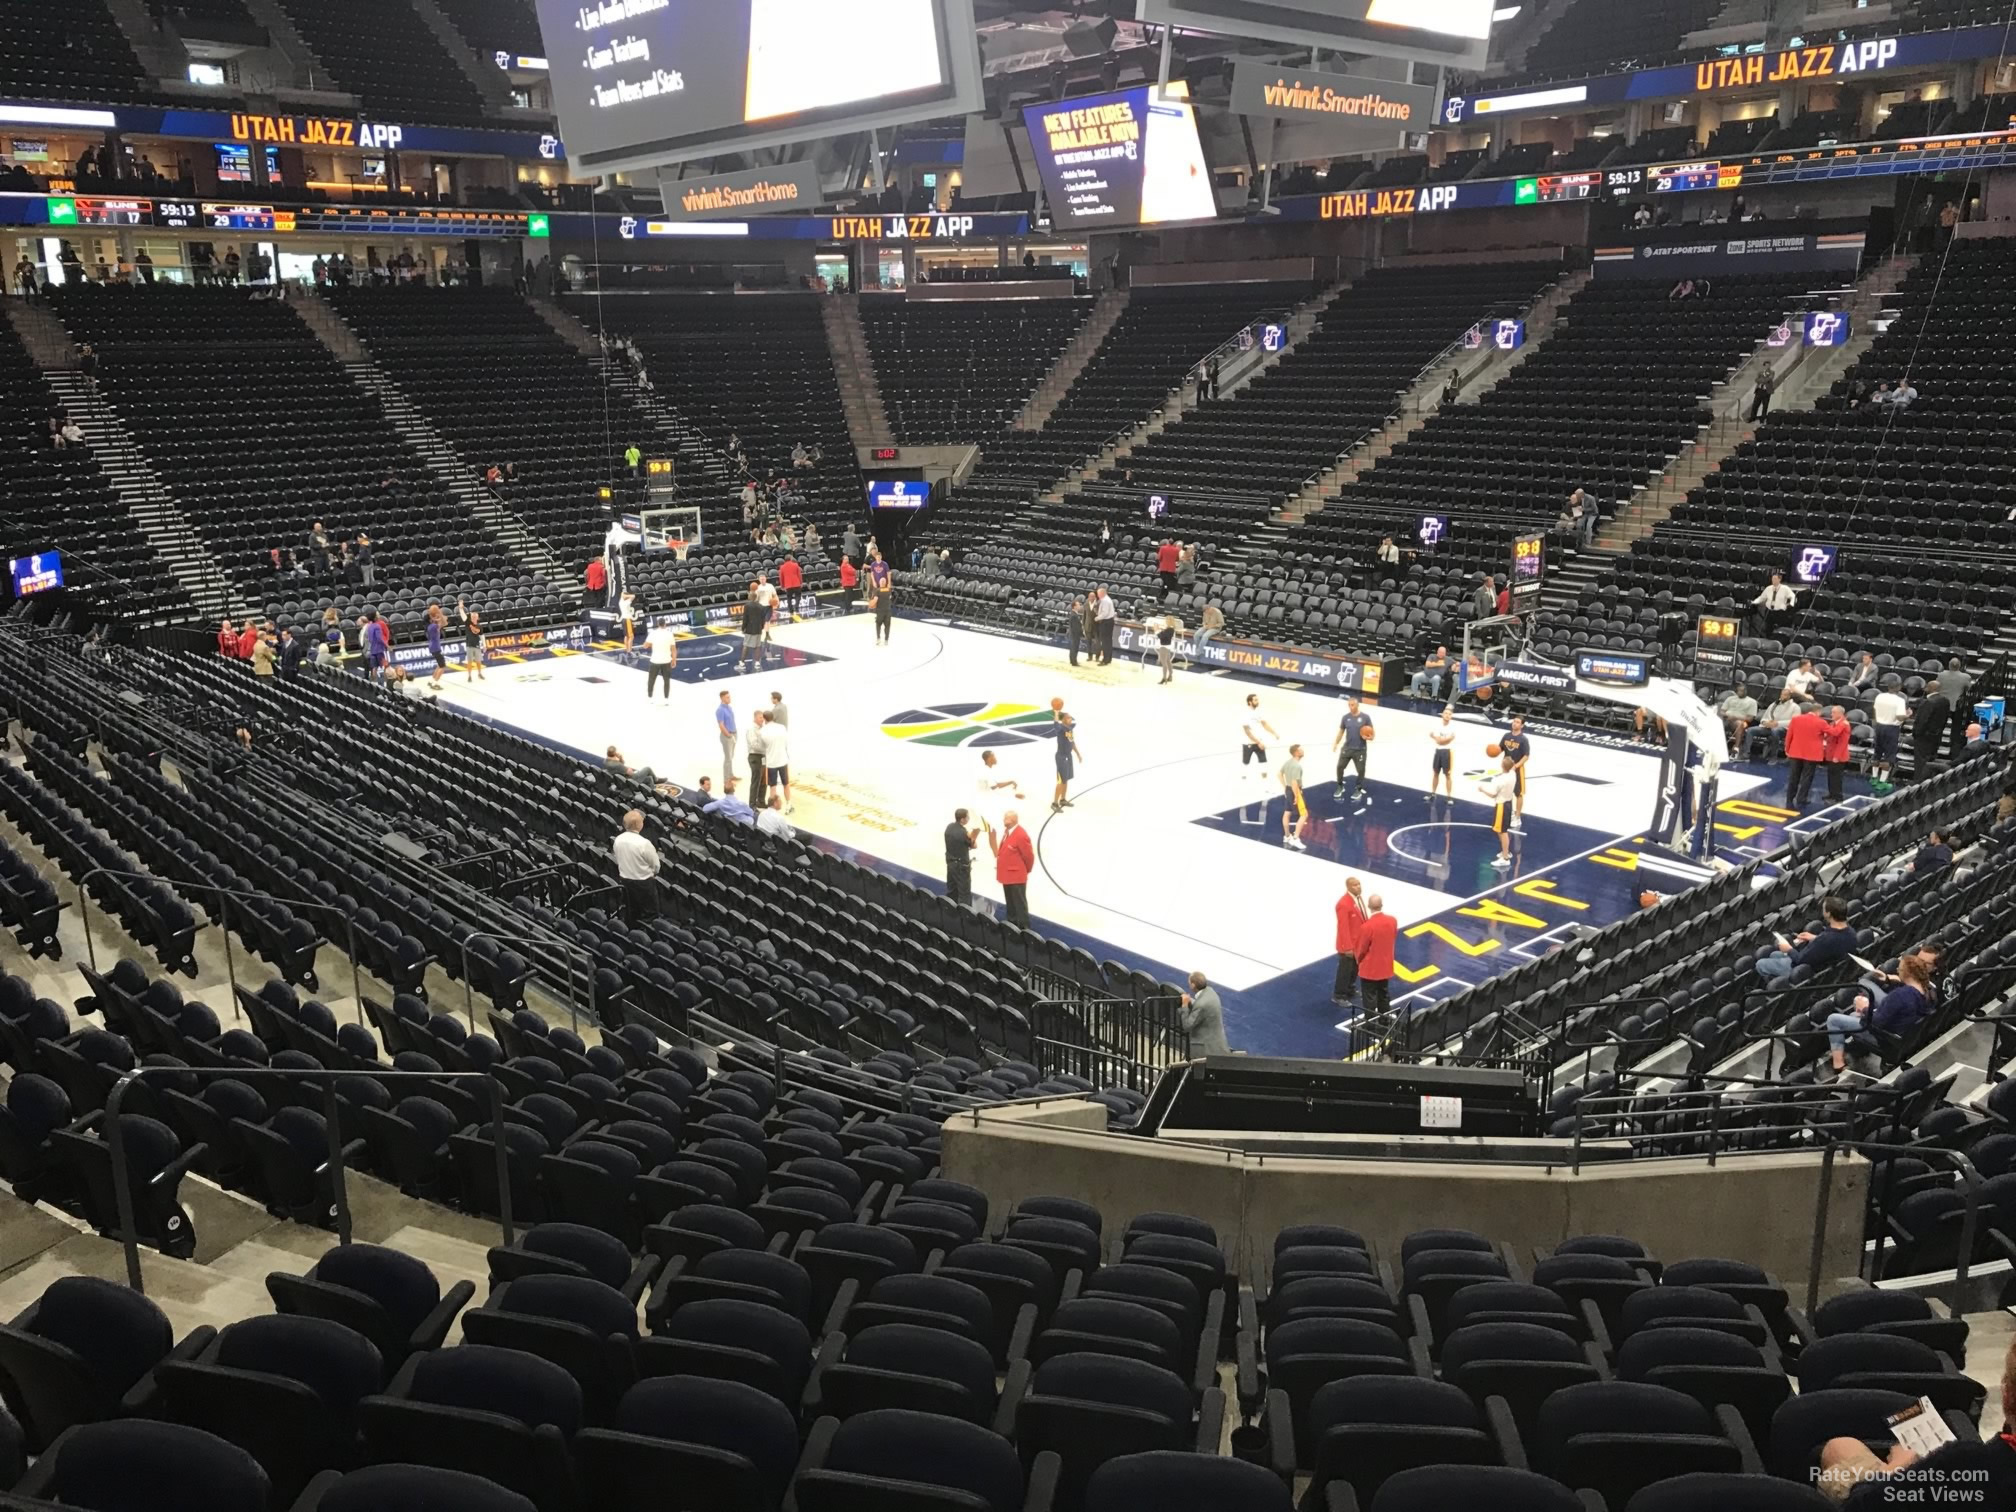 section 15, row 20 seat view  for basketball - delta center